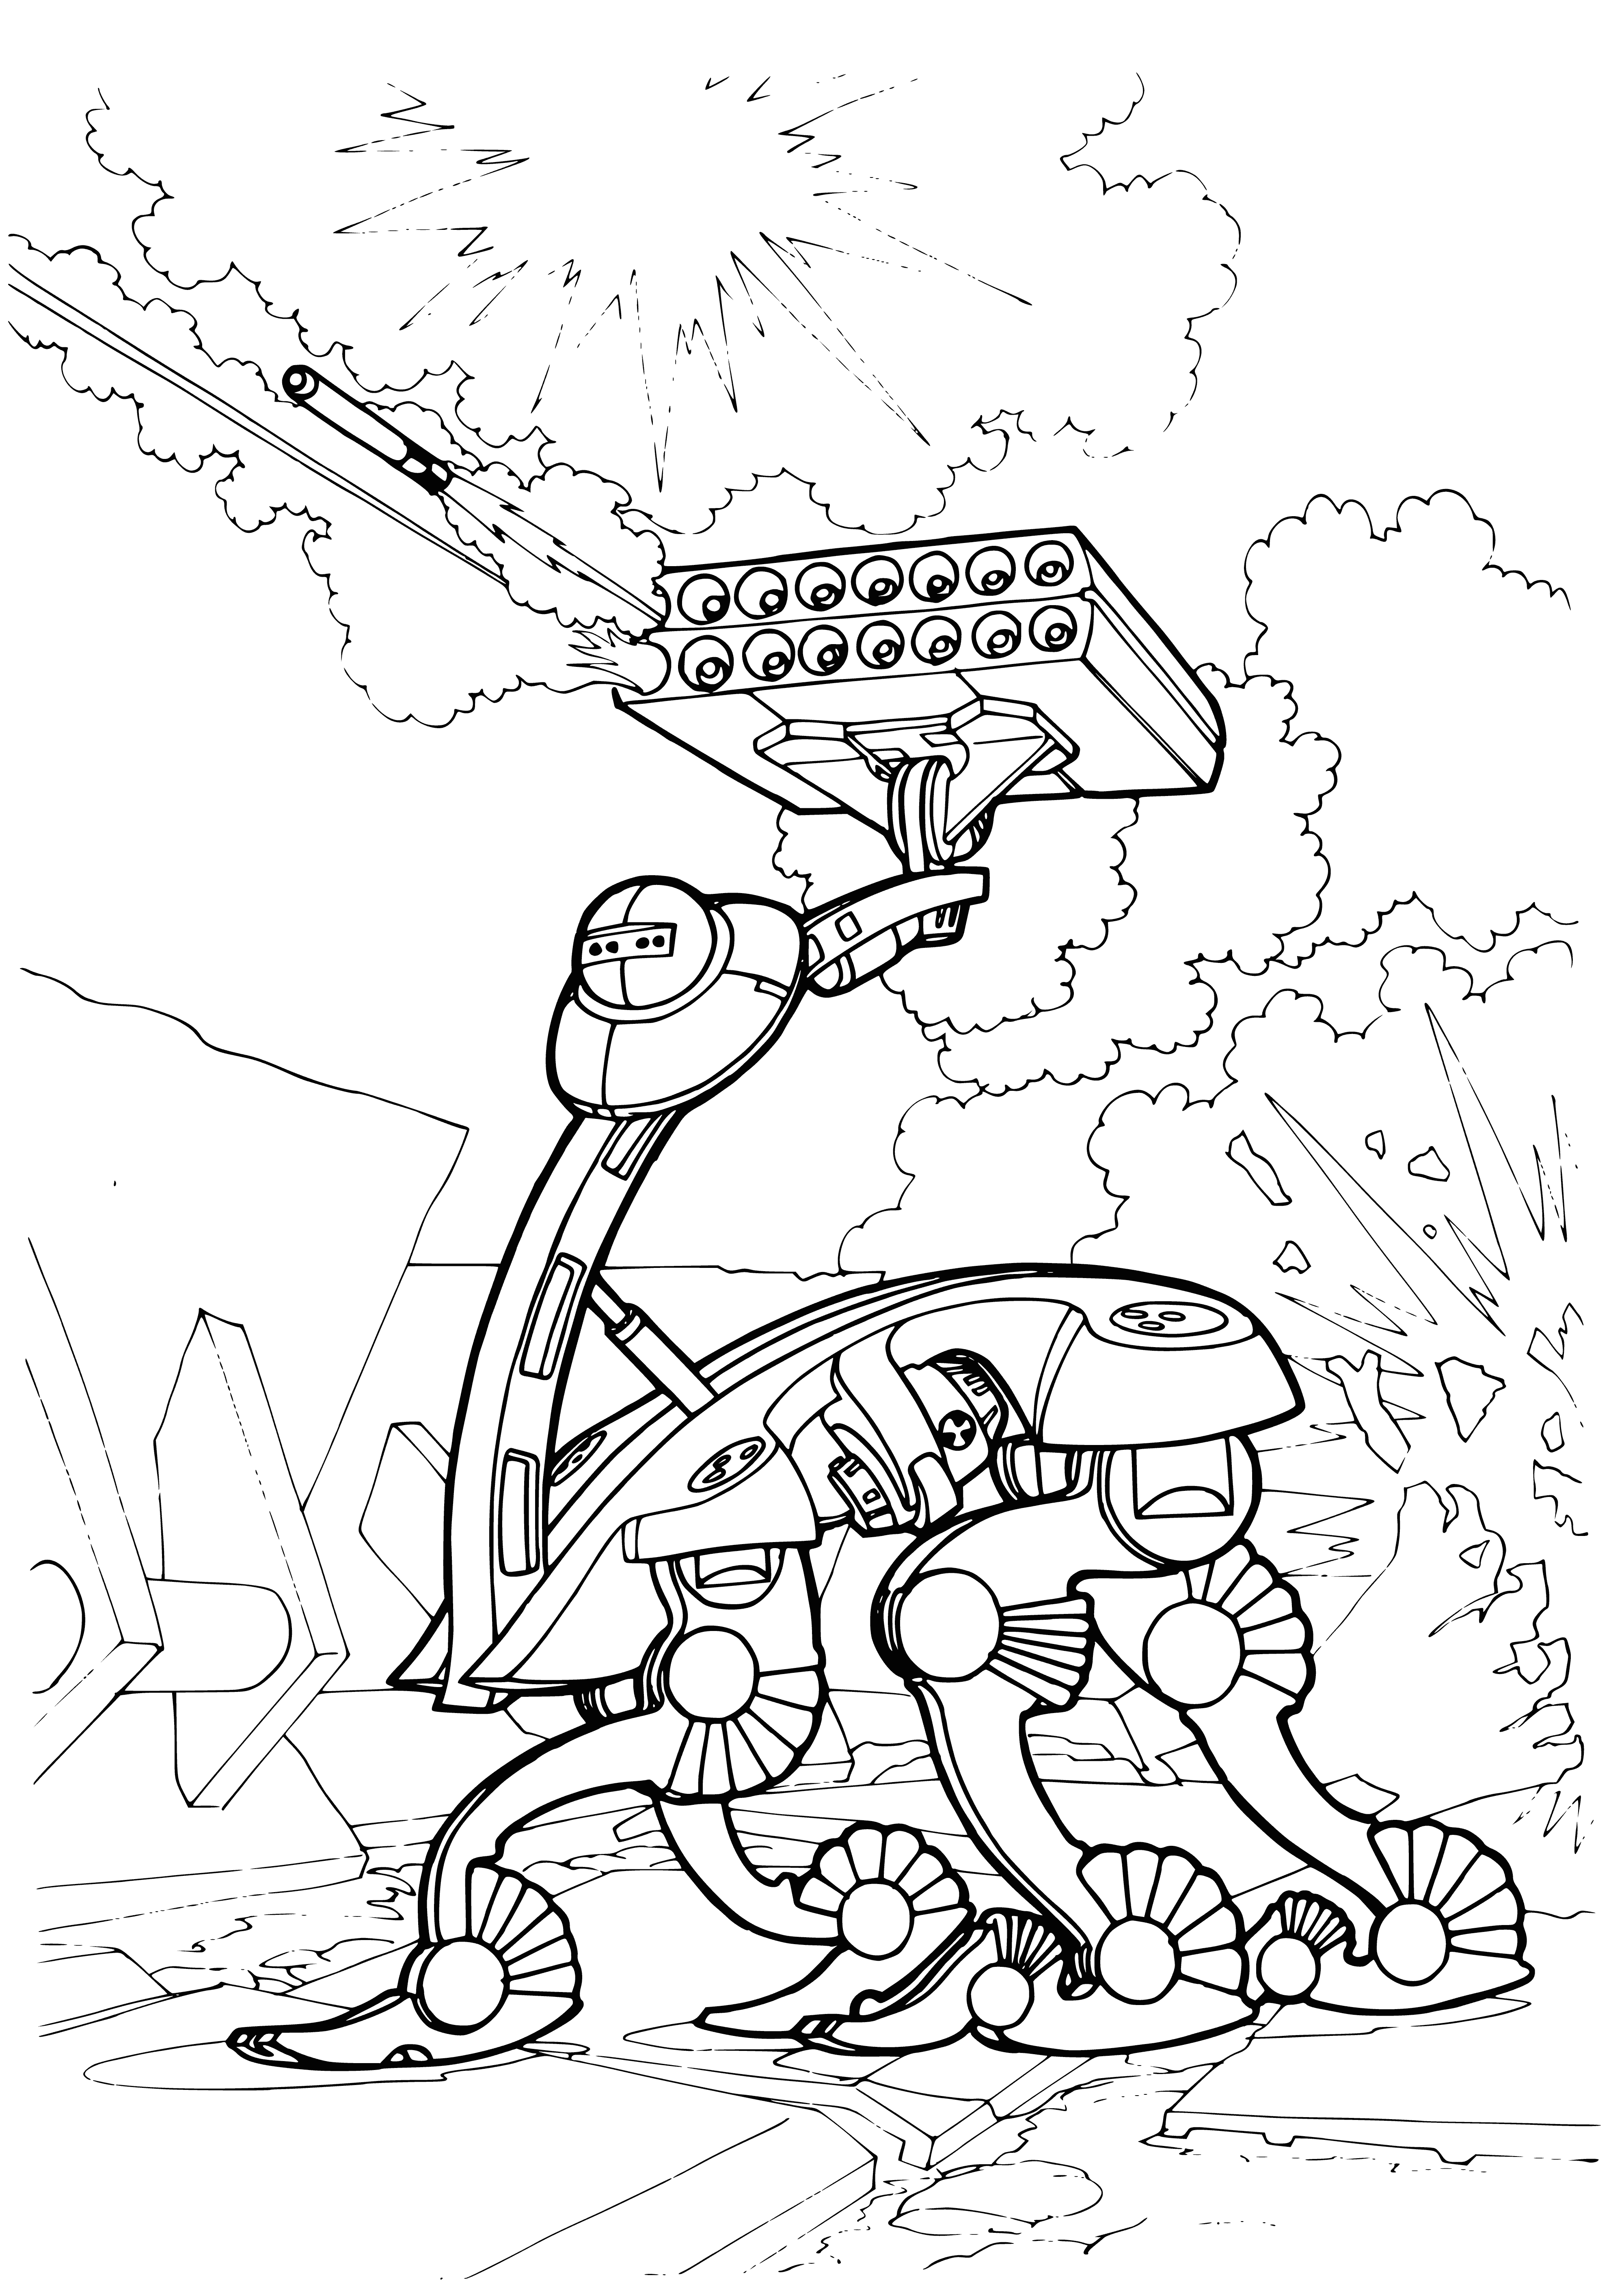 coloring page: Future wars will be fought with multiple launch rockets, attacking many targets quickly & effectively. #SupportOurTroops